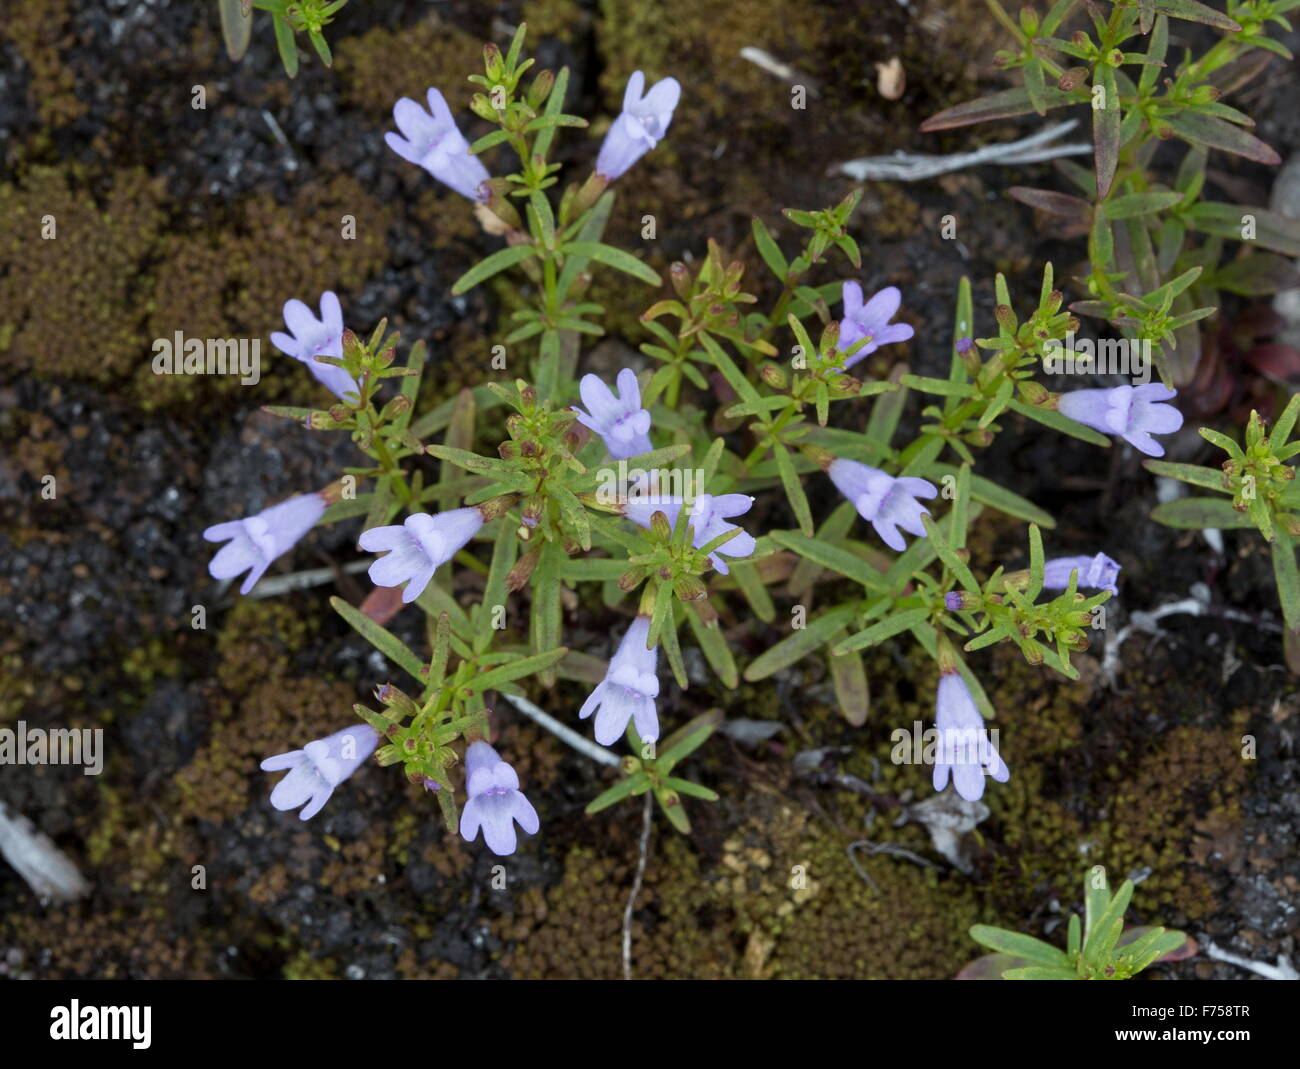 Arkansas Mint, or Low Calamint in flower. Ontario. Stock Photo